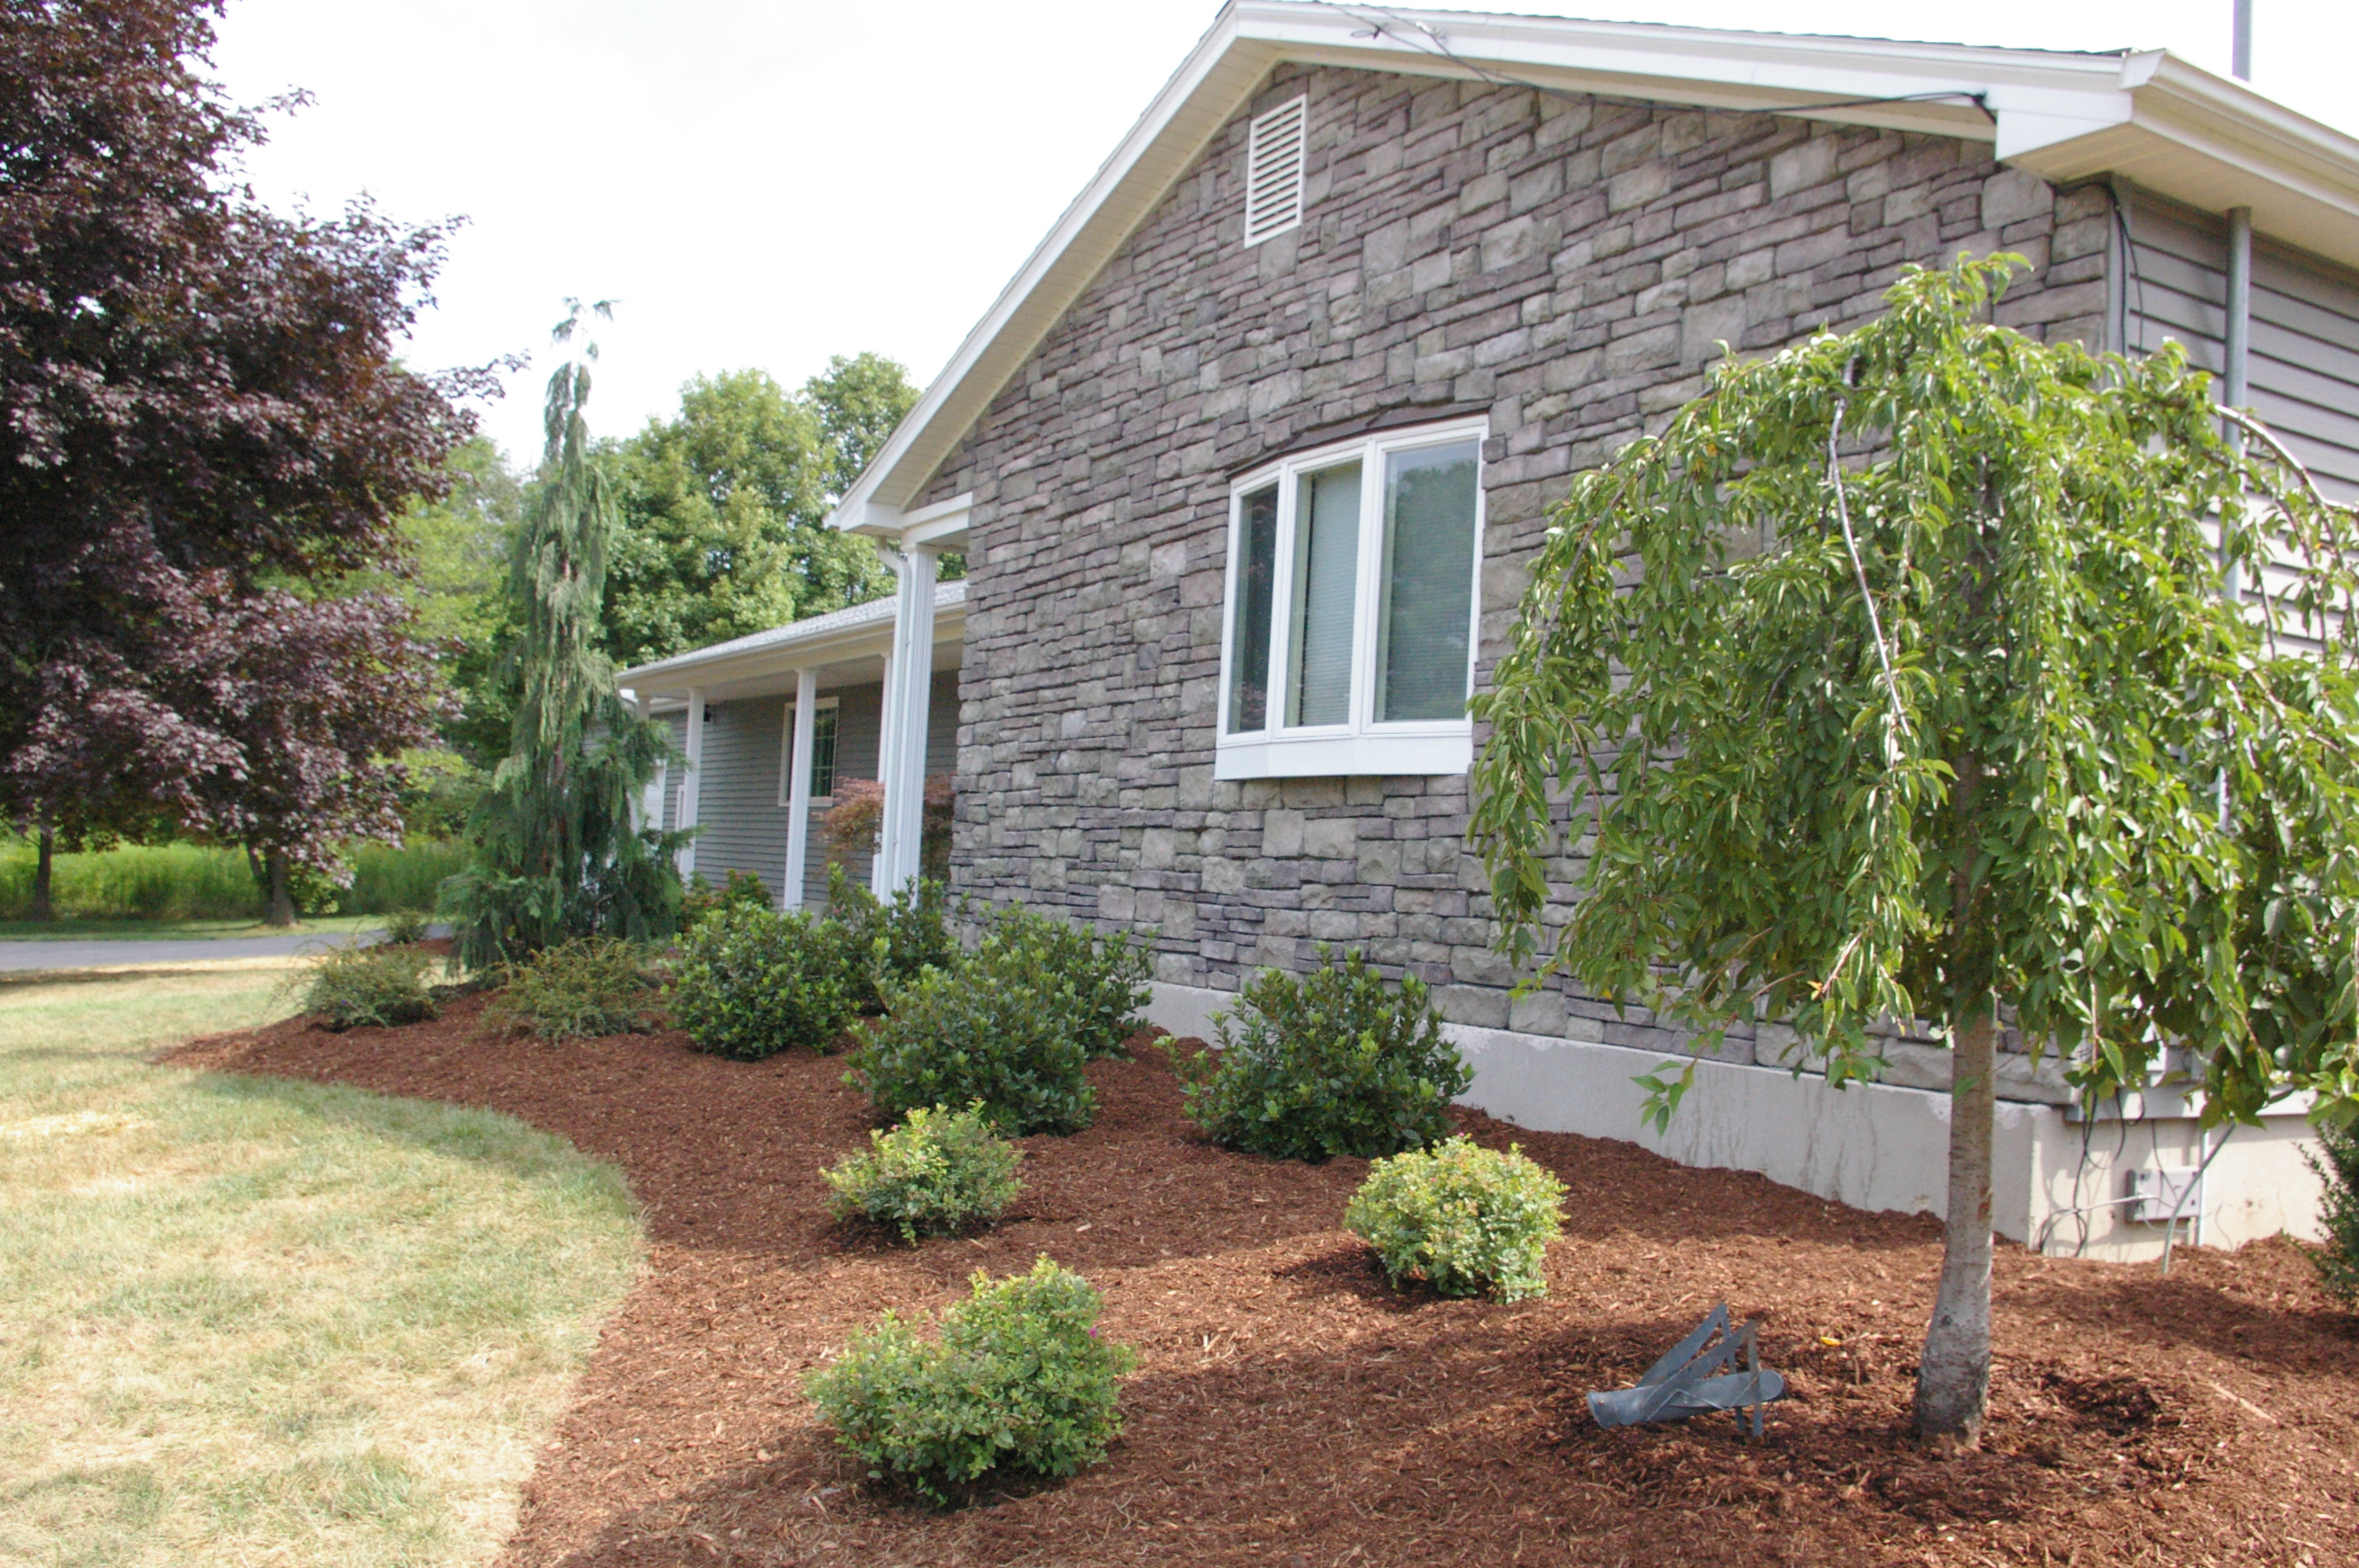 How to Care for Your New Landscape